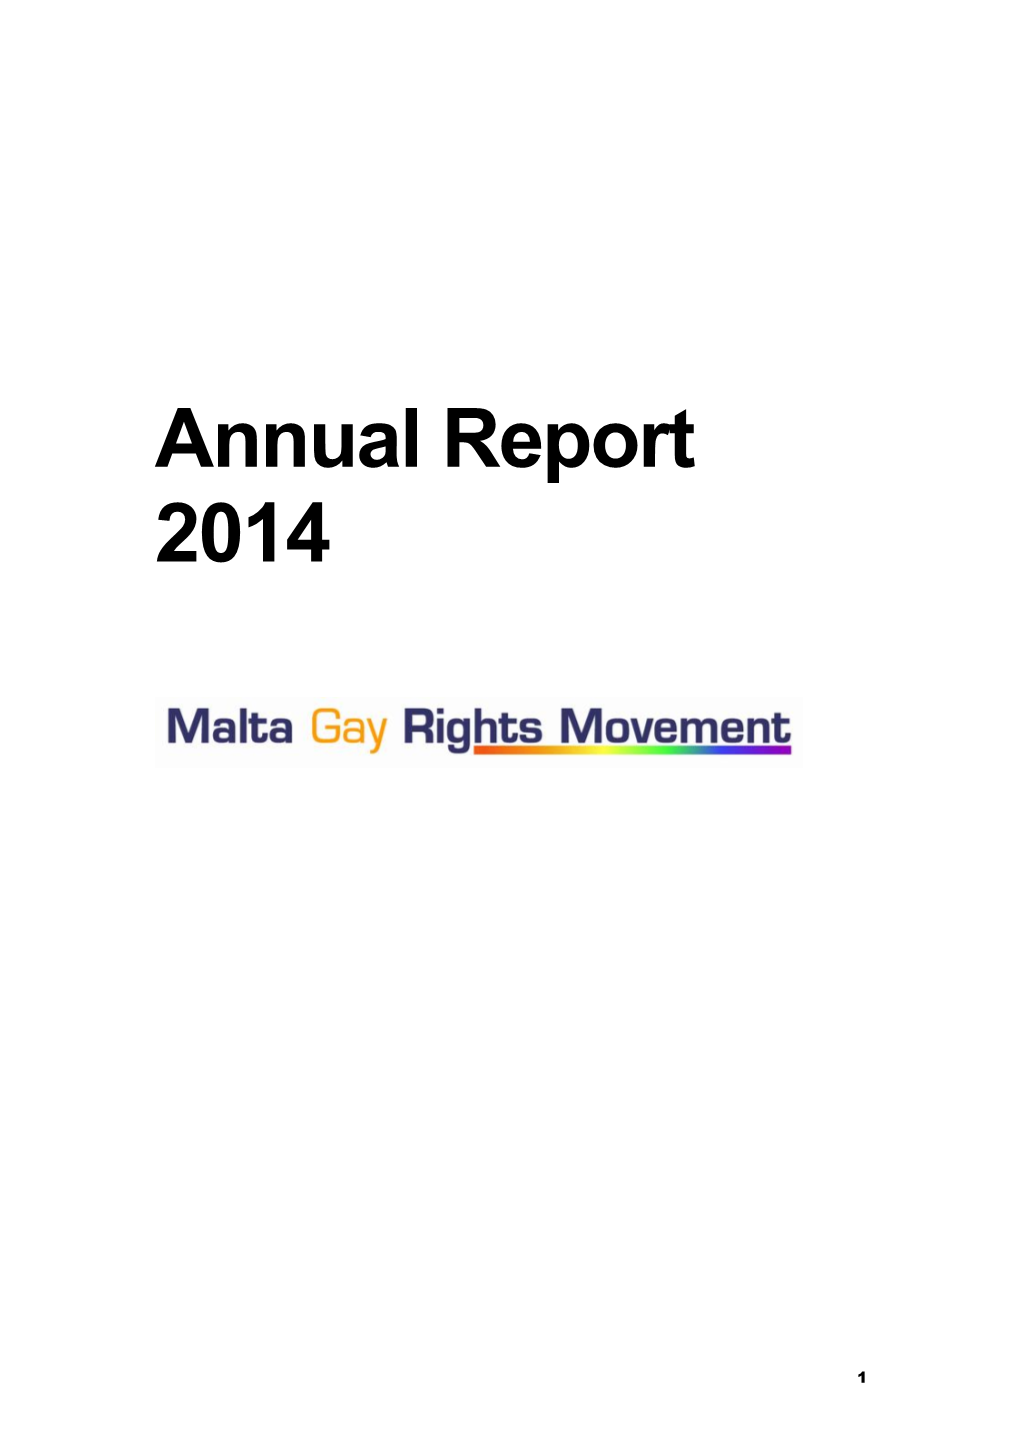 MGRM Annual Report 2014